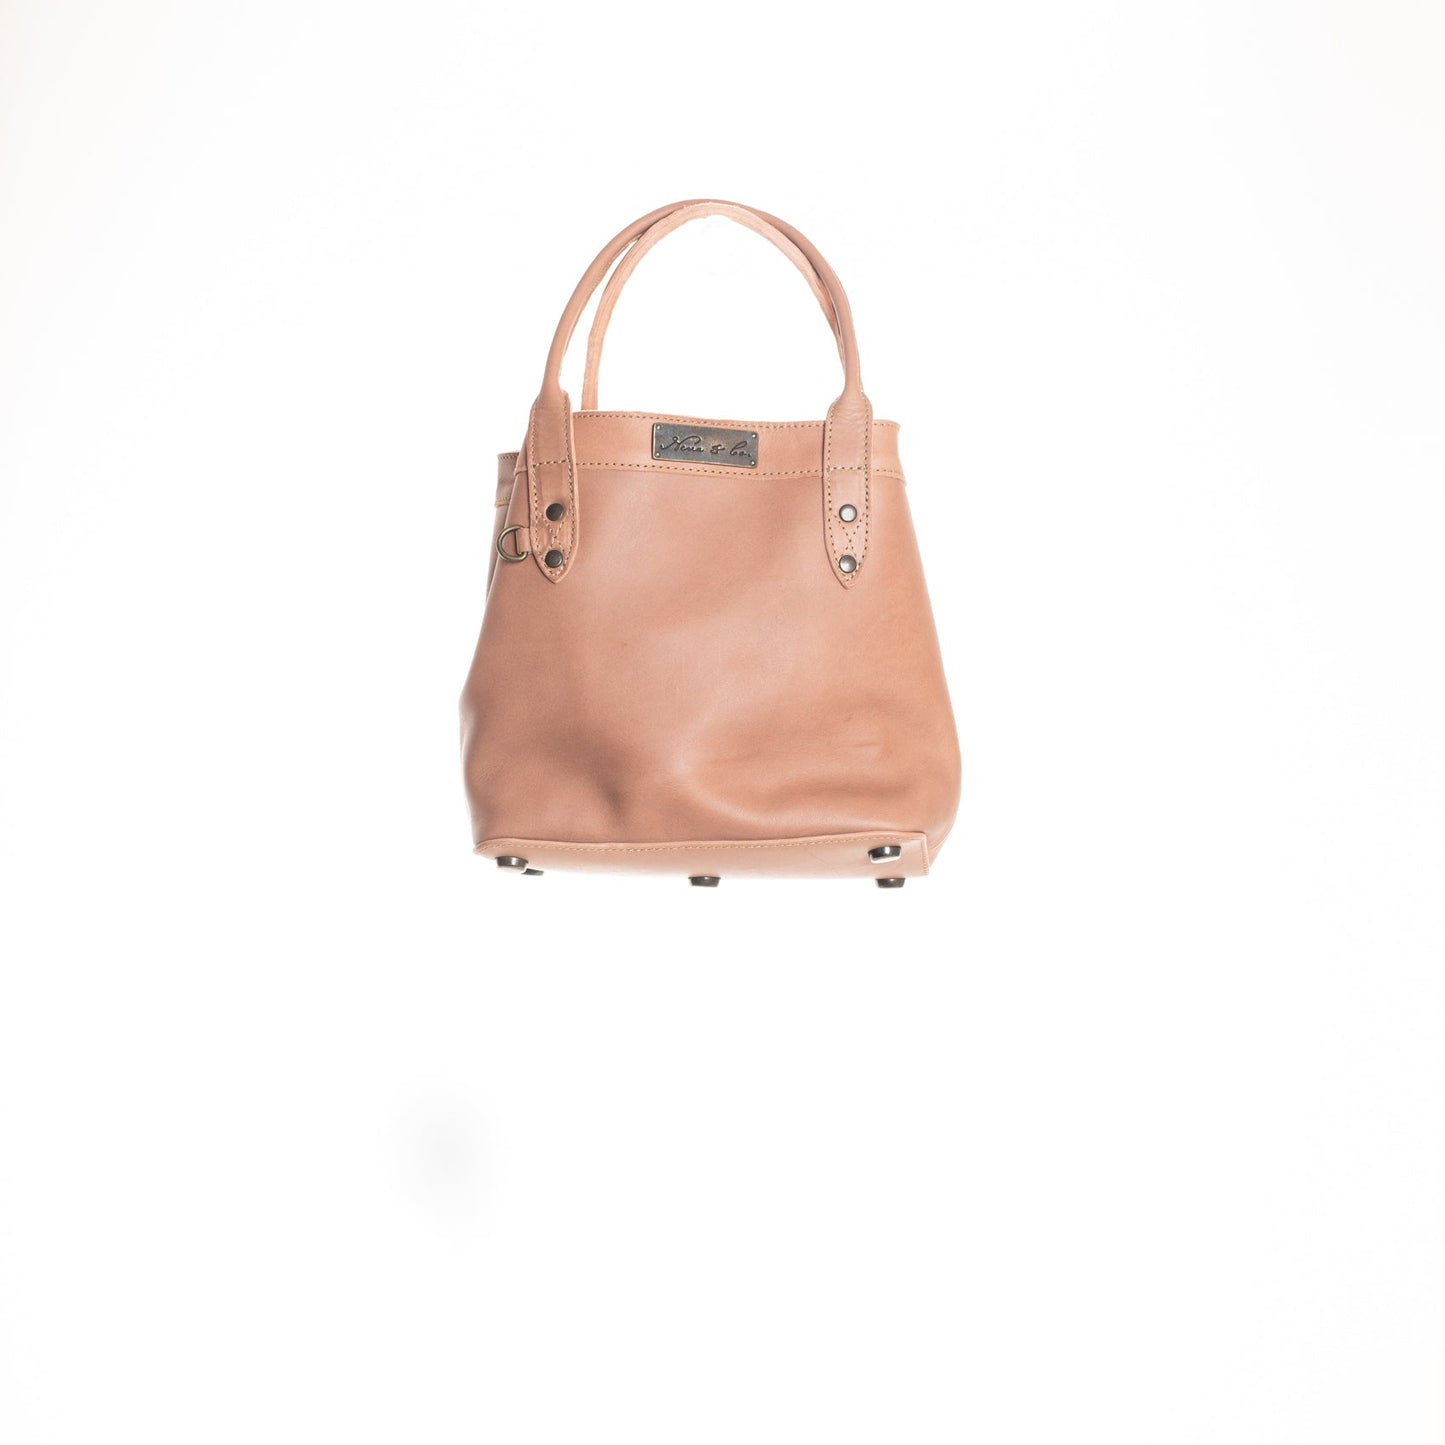 MINI CONVERTIBLE TOTE - MEXICO COLLECTION - FULL LEATHER - ROSÉ LEATHER